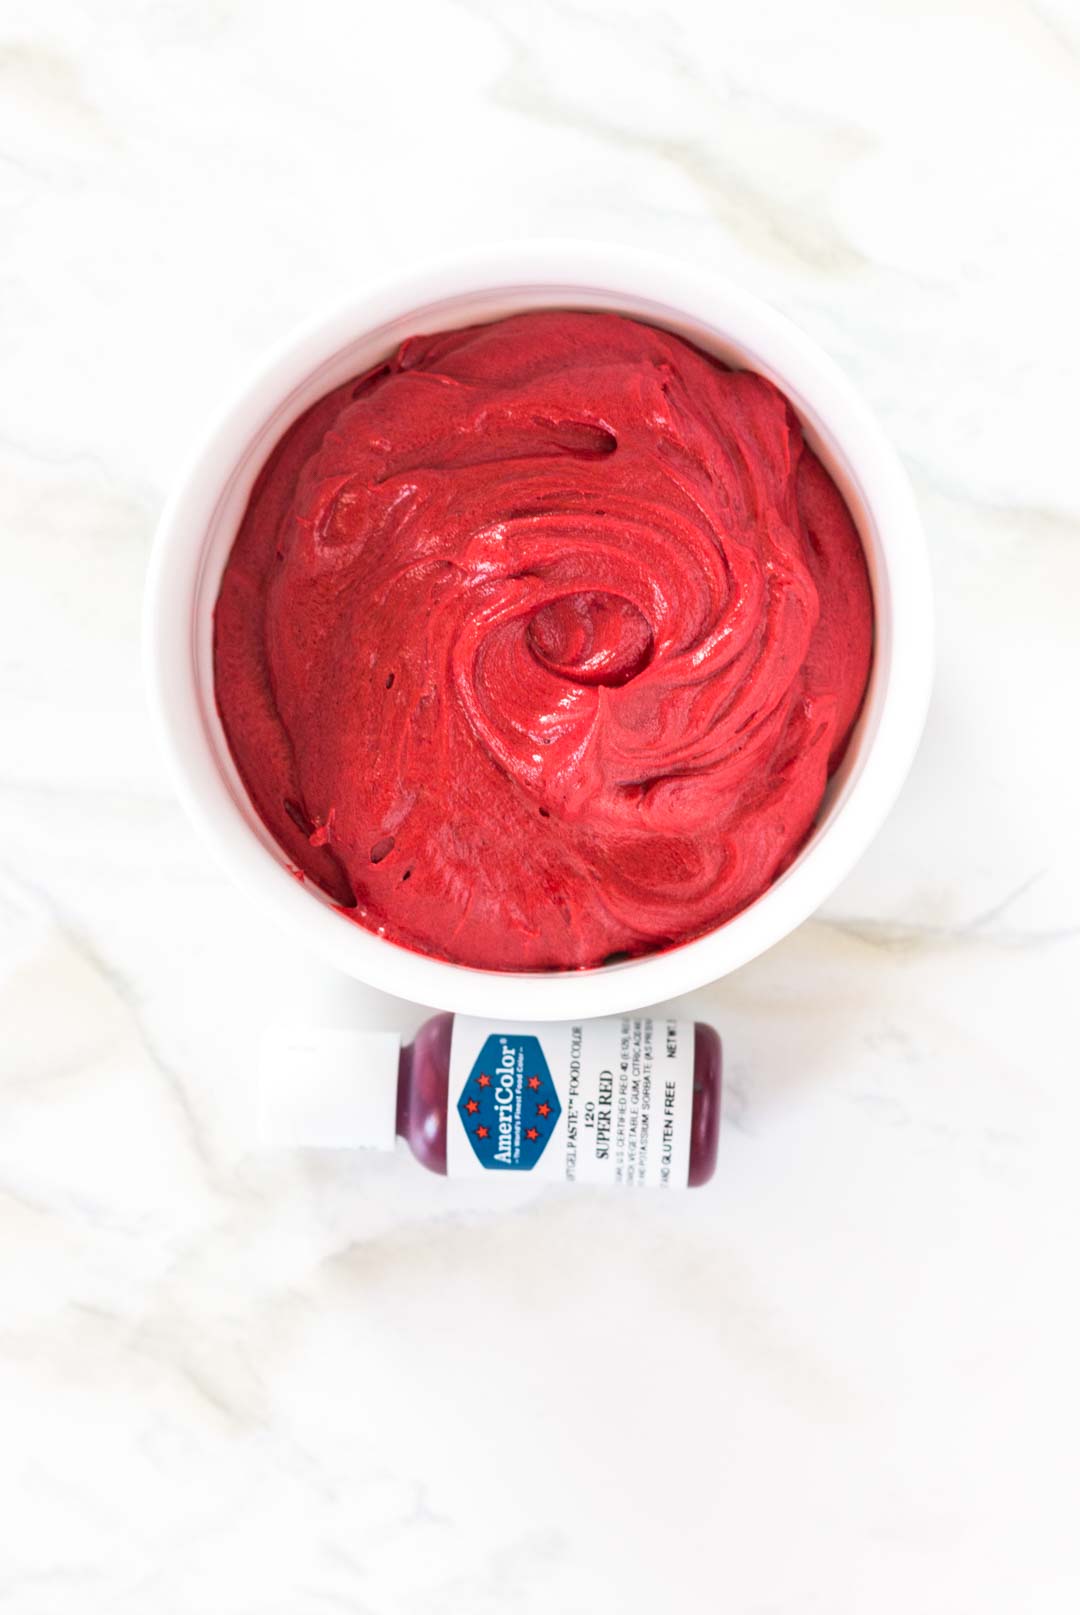 Coloring buttercream red with americolor gel color